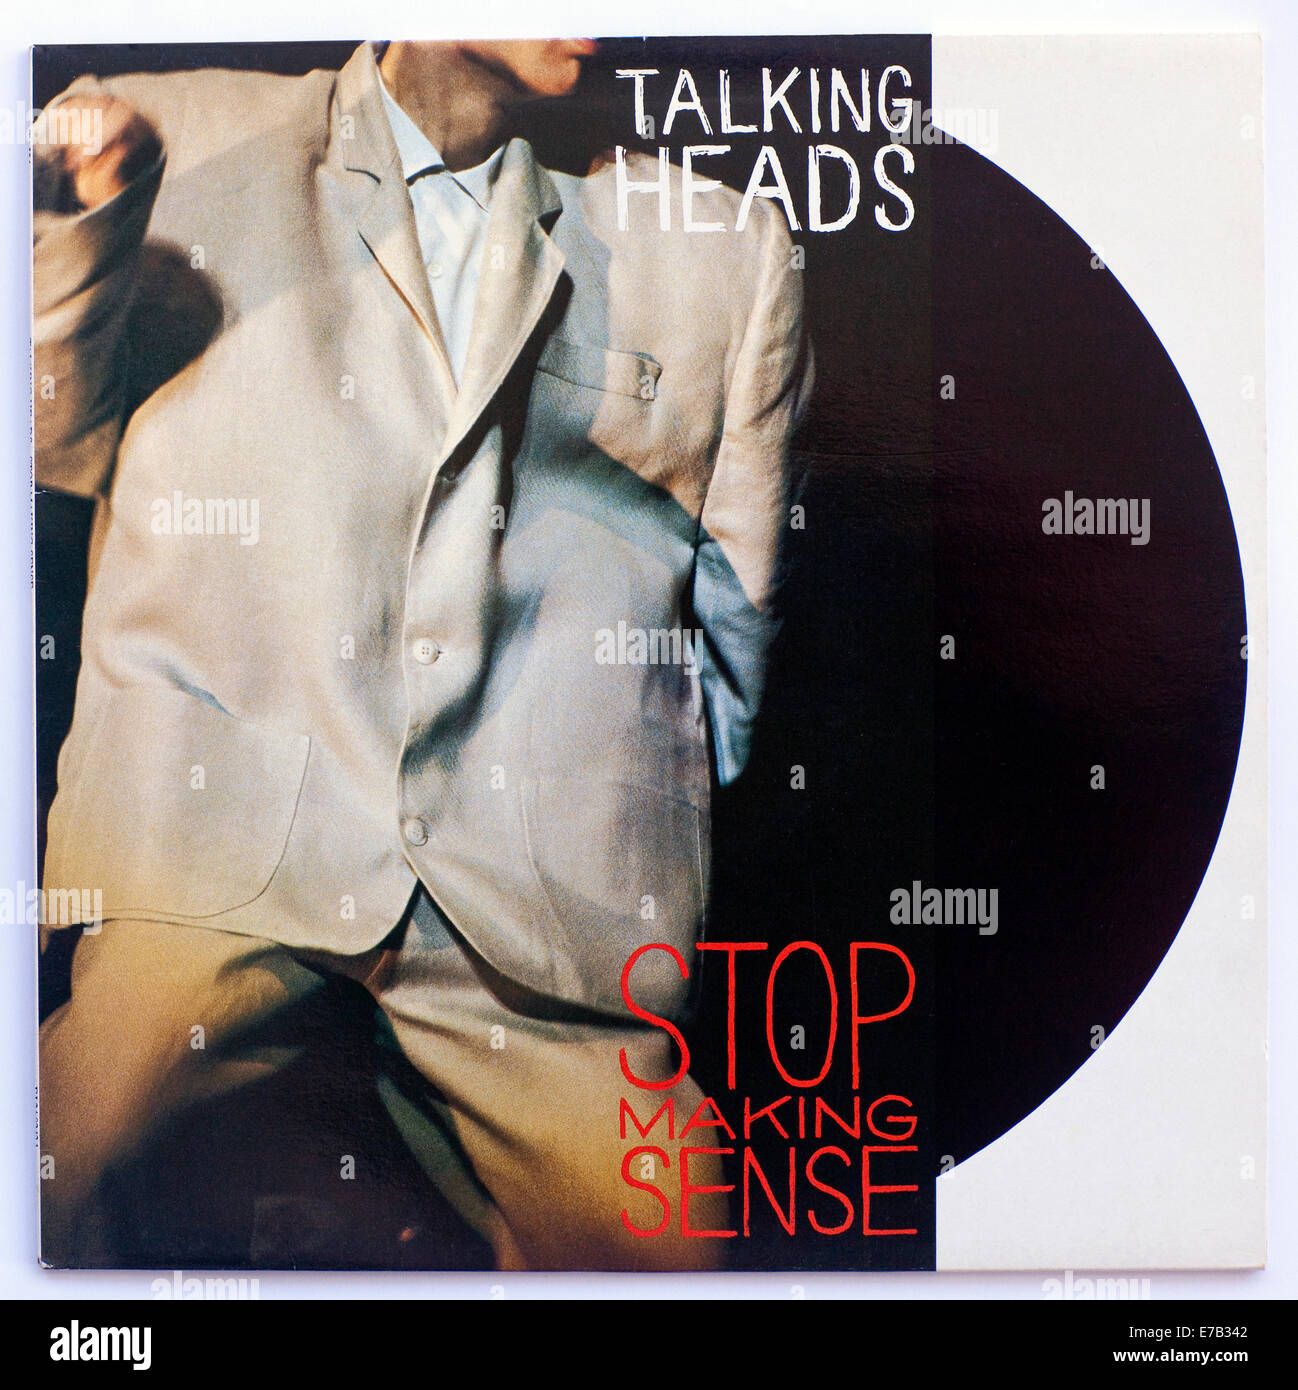 Talking Heads - Stop Making Sense 1984 film soundtrack album cover - Editorial use only Stock Photo